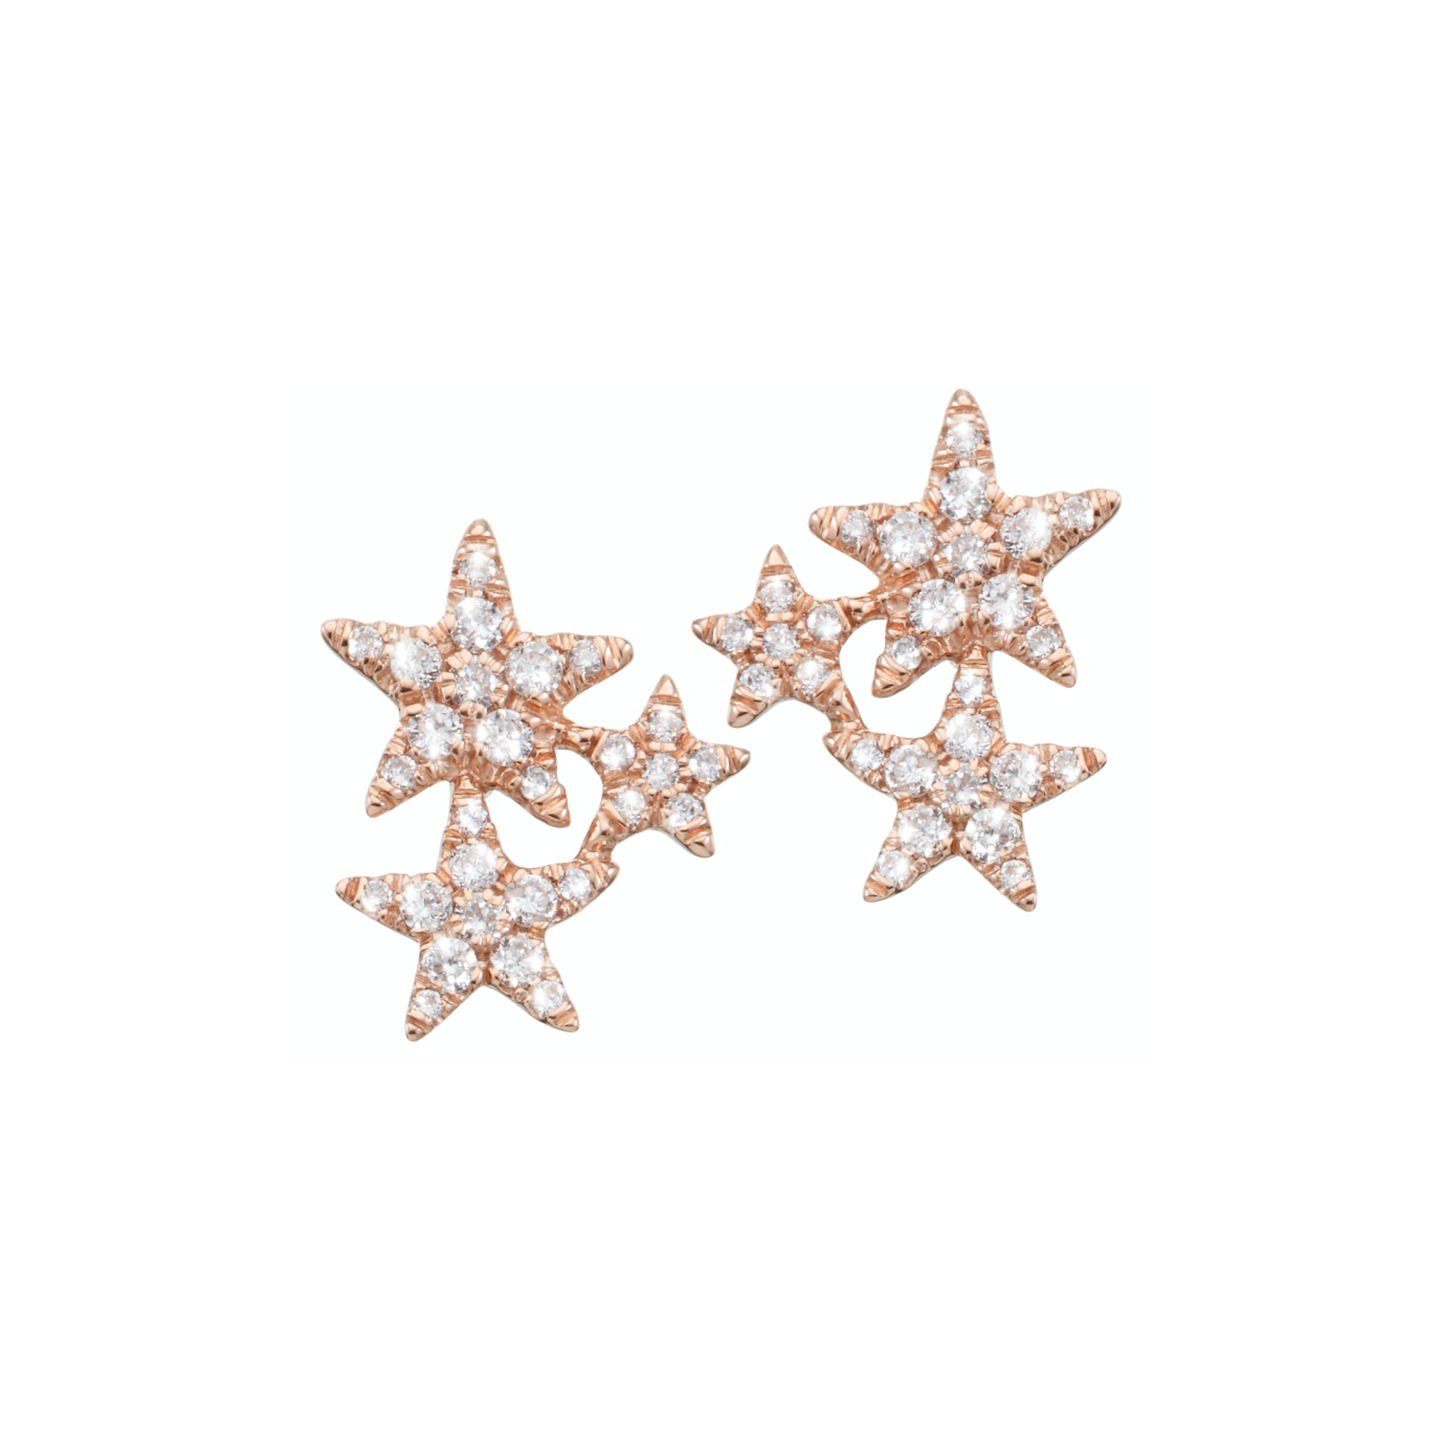 Designed in the form of sparkling stars and adorned with subtle diamonds. These adorable ear studs are carefully handcrafted and made of 18k rose gold.